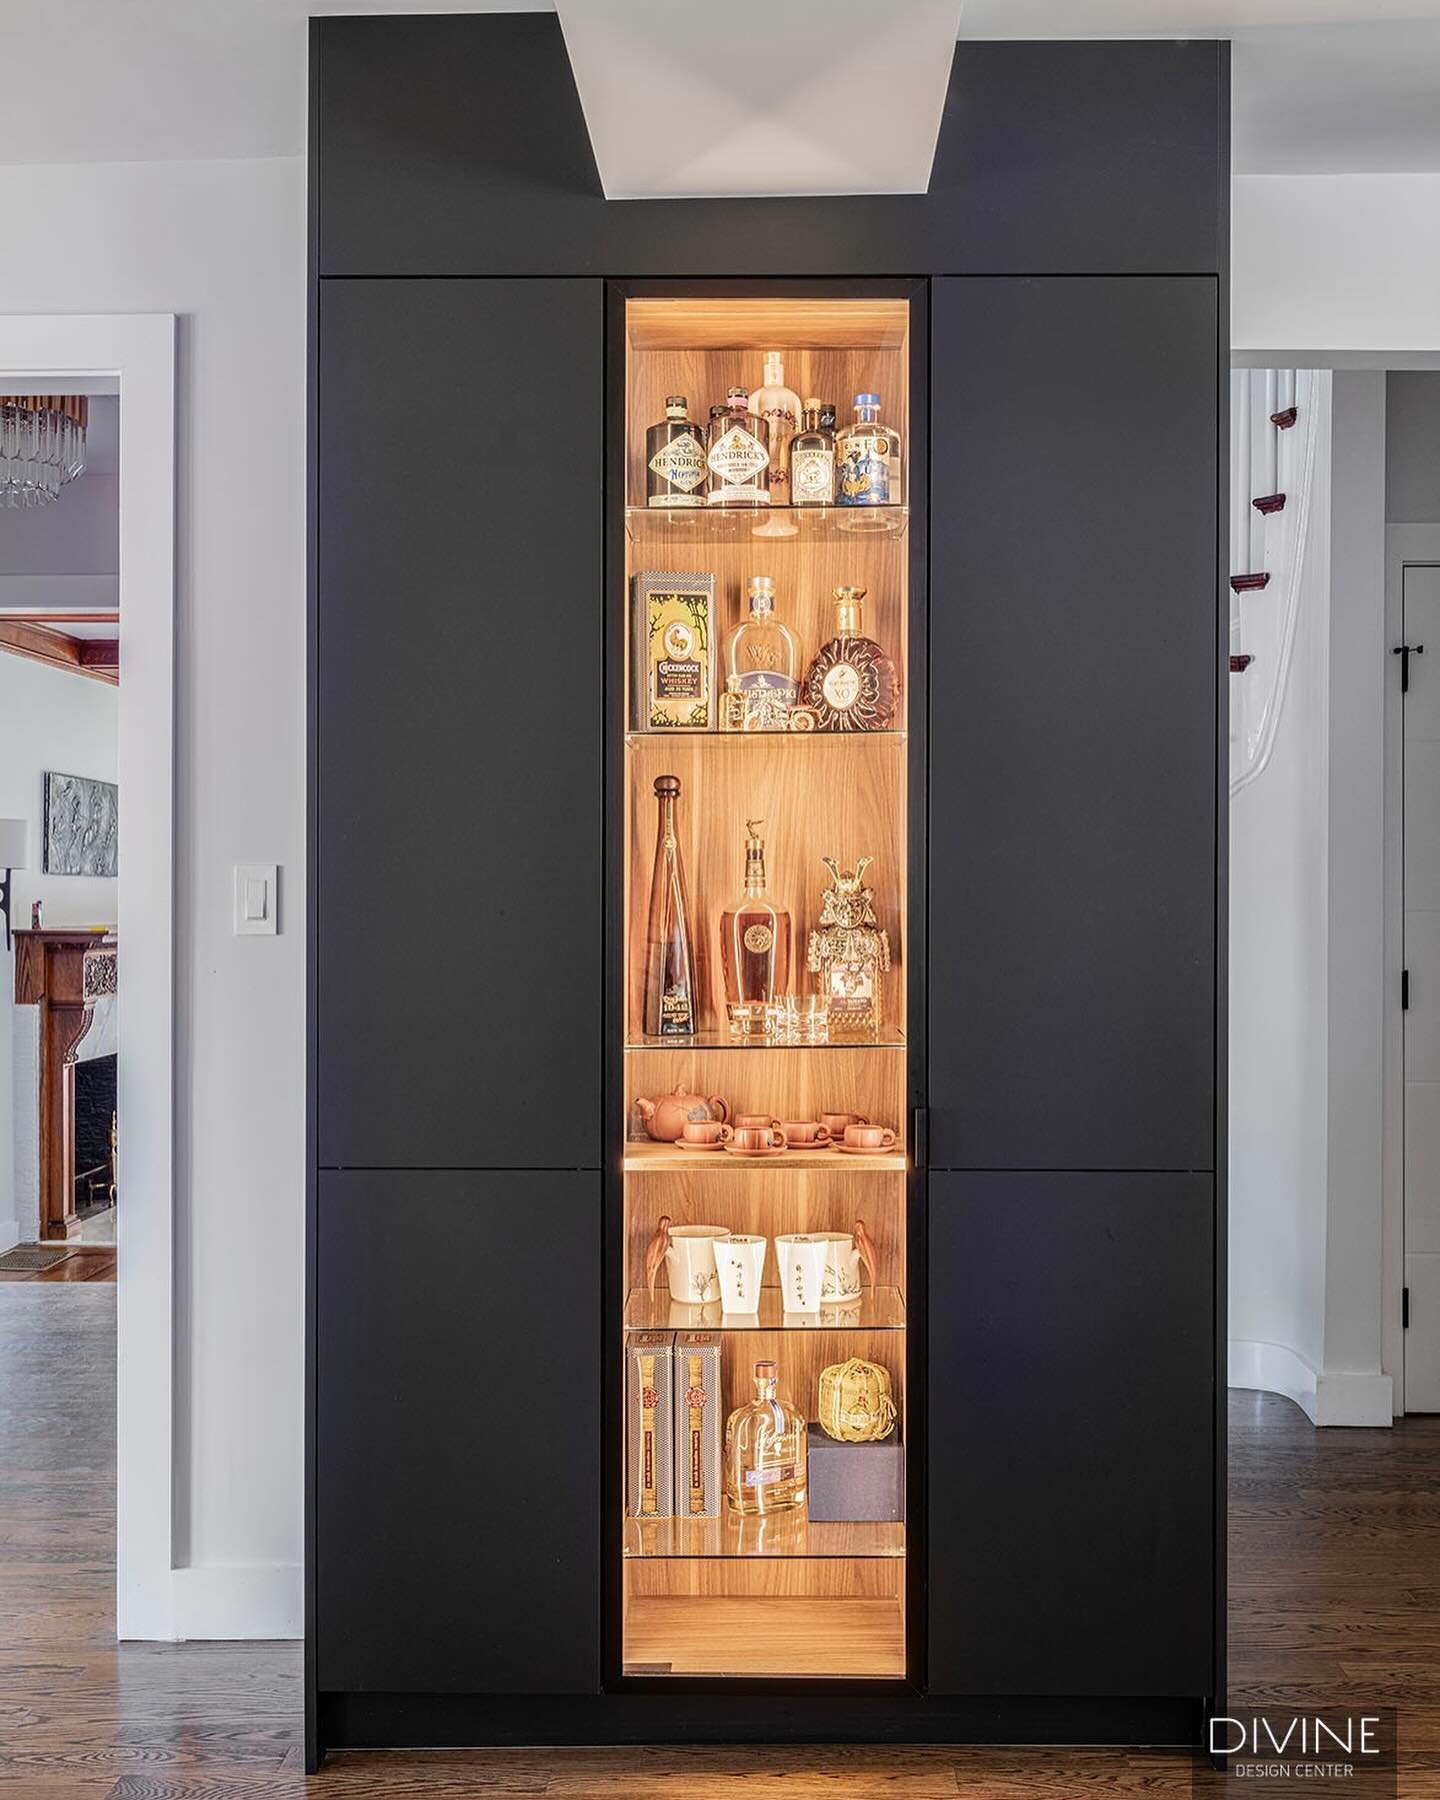 The &ldquo;VERO&rdquo; system from @leichtkuechen is one of our favorite ways to use glass inside the home. These clients of ours choose to use theirs as a display cabinet for their liquor and tea&hellip; what would you use yours for? 
Designer: XXL 